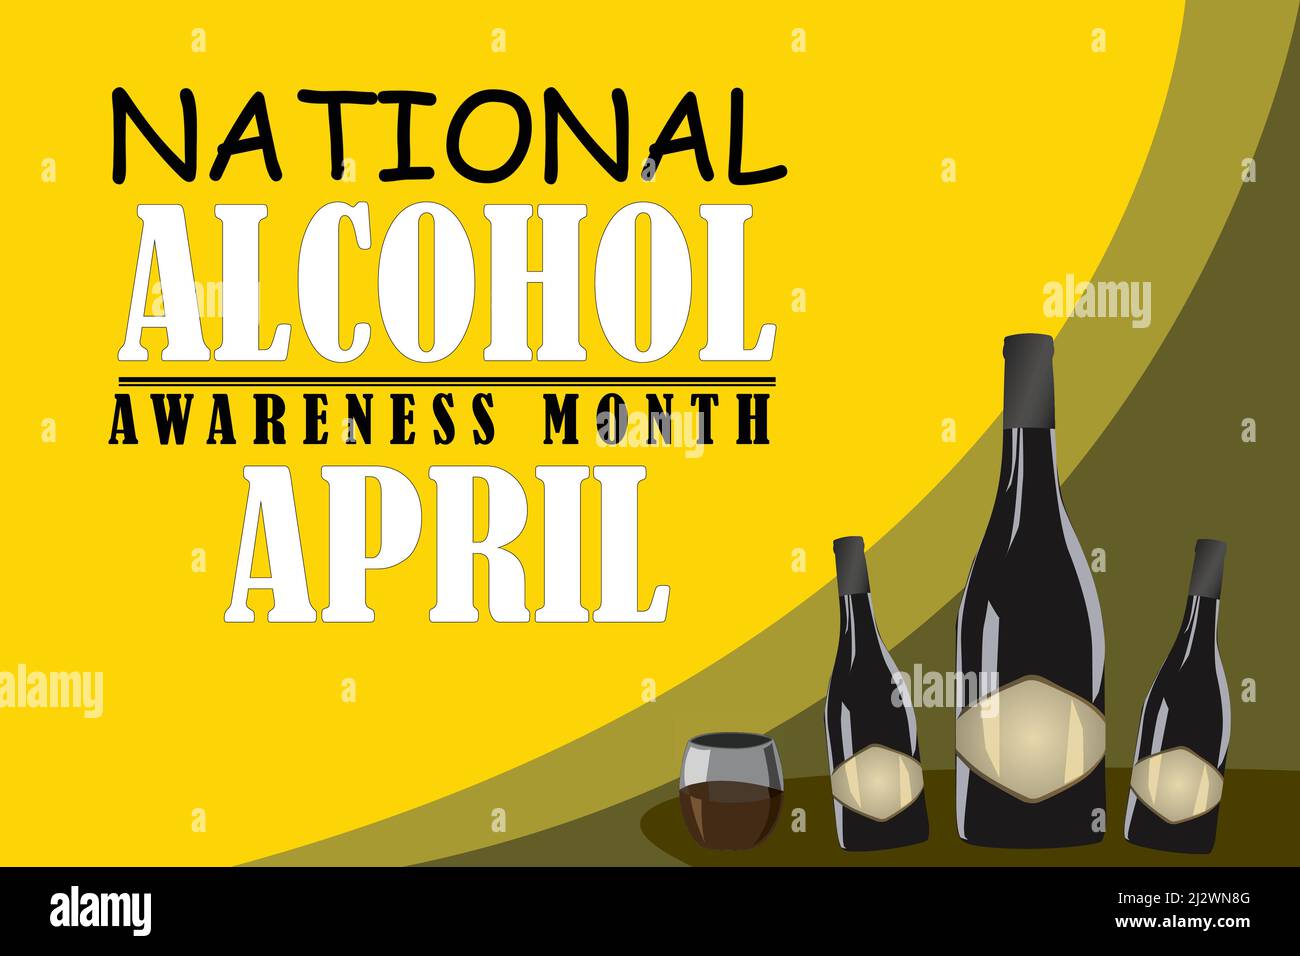 Banner Or Poster Vector Design For National Alcohol Awareness Month April Stock Vector